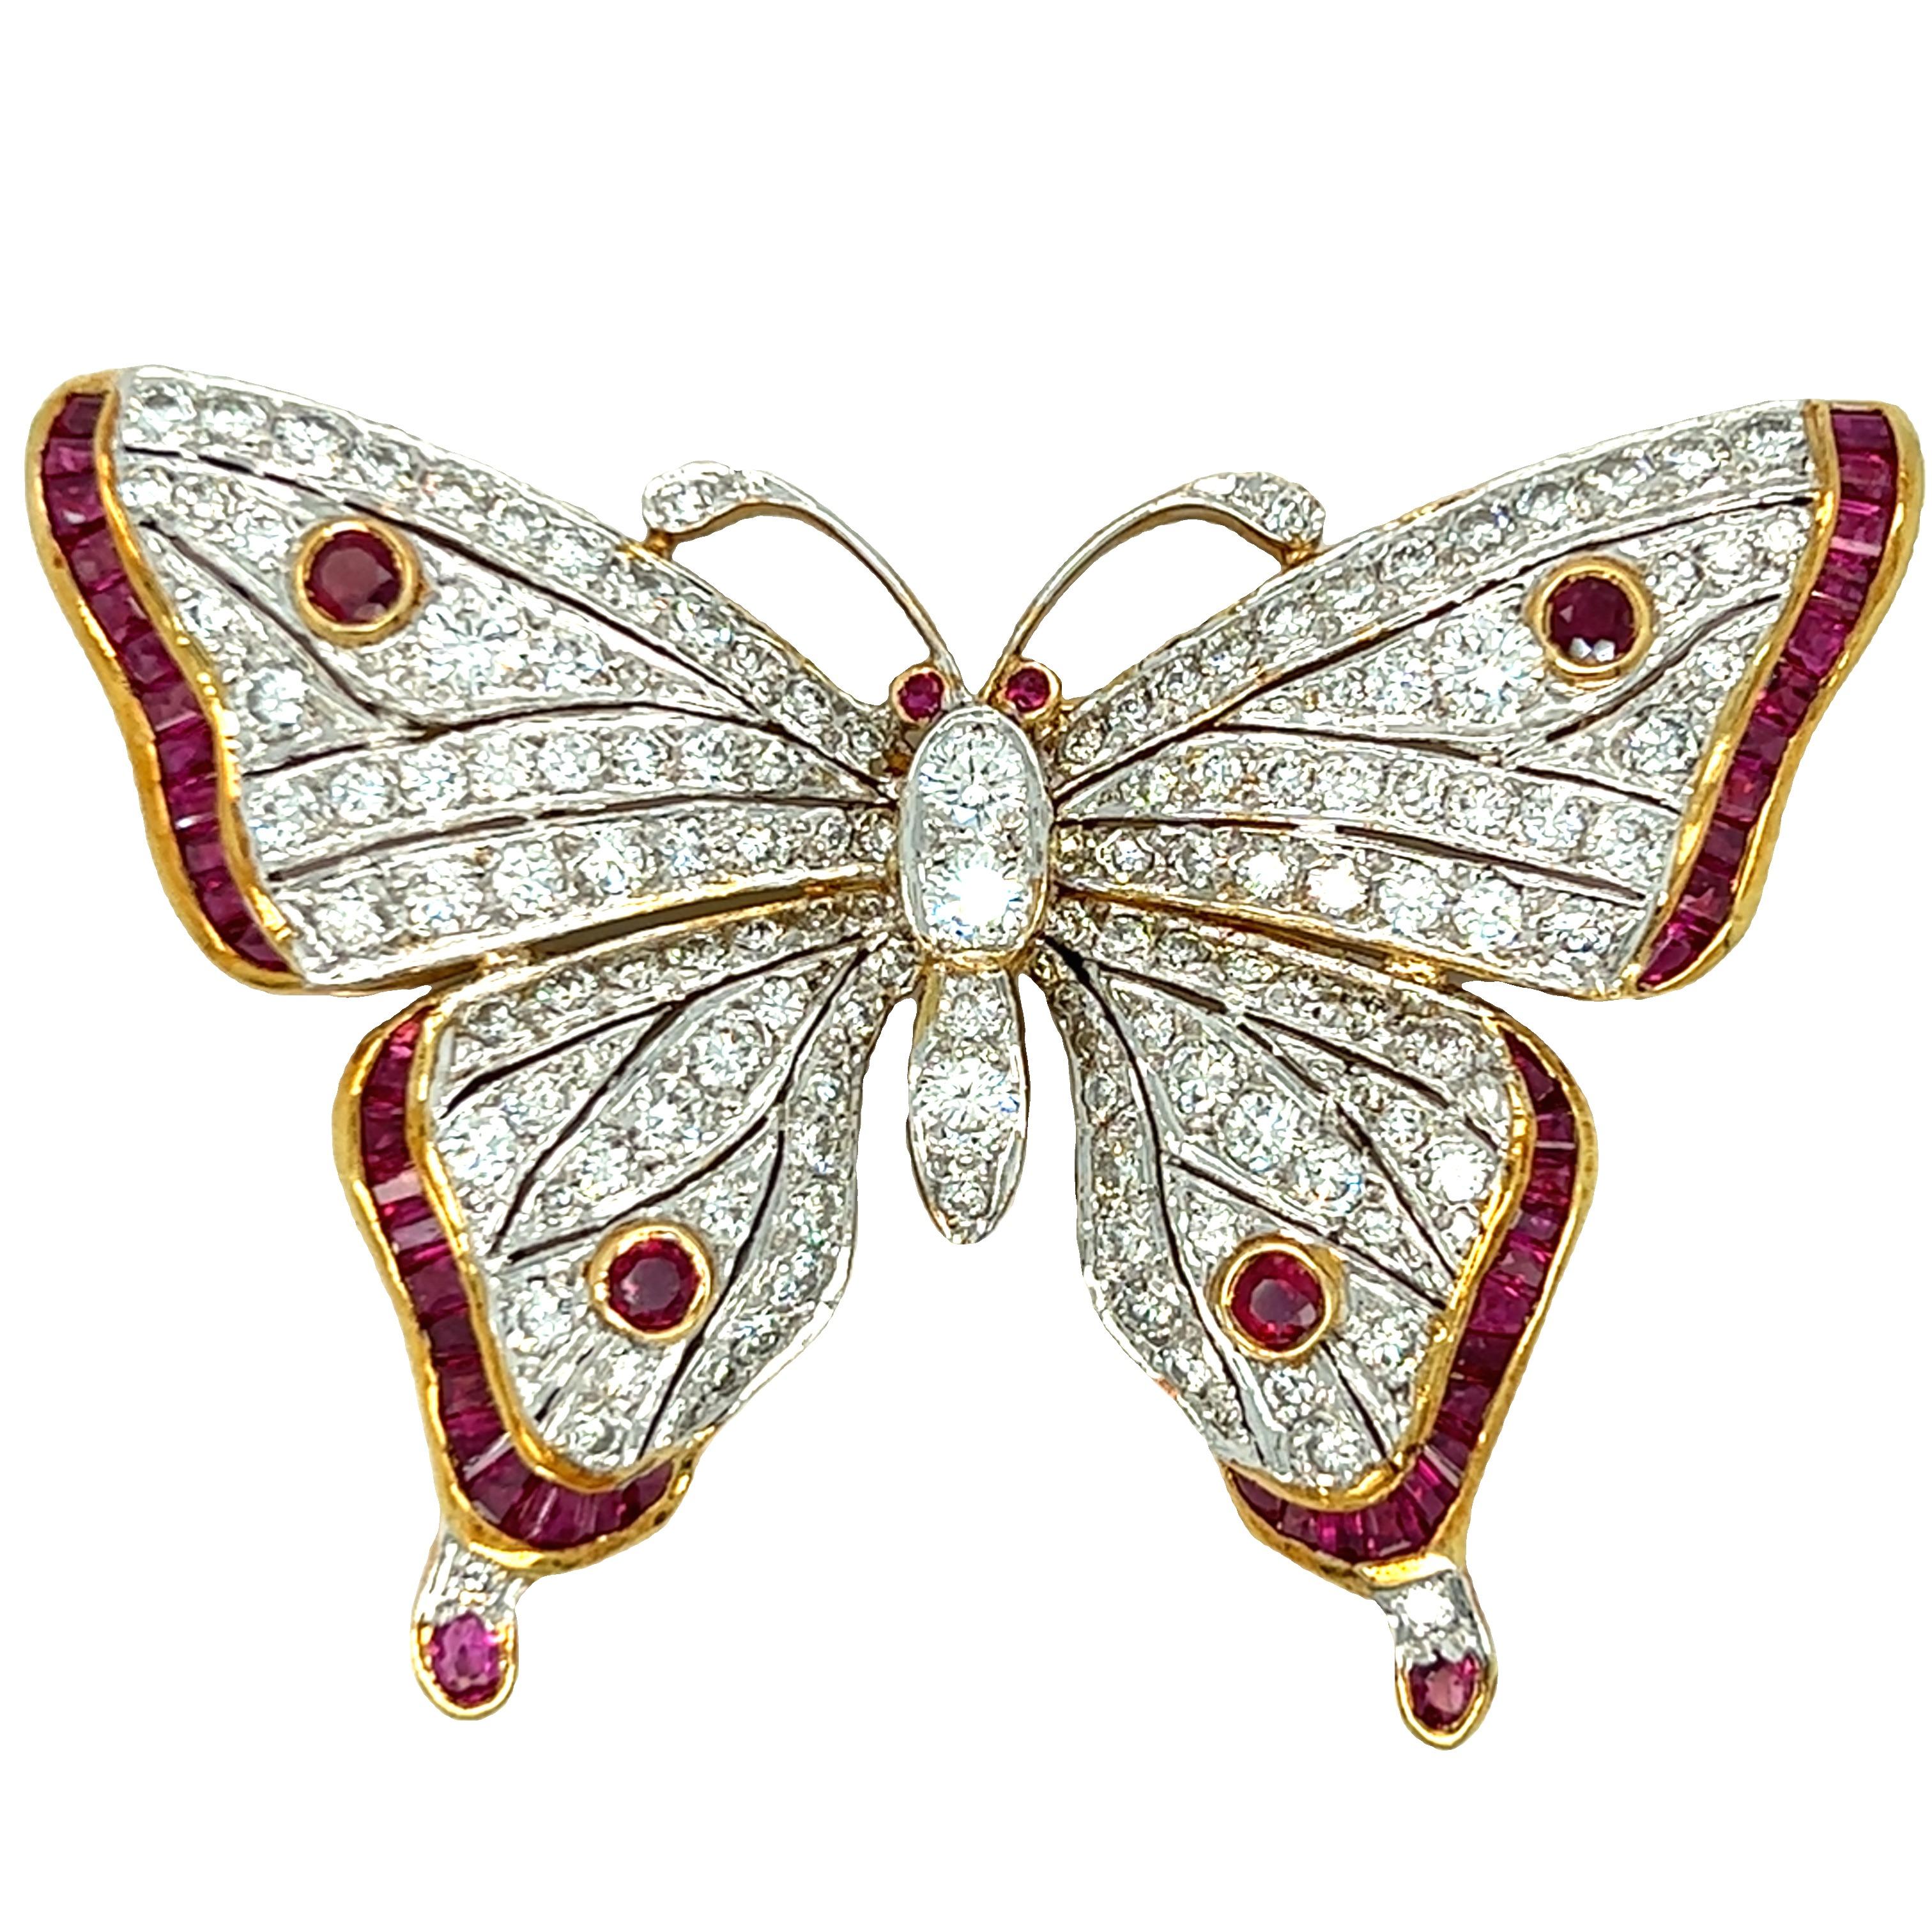 Elegant. Glittering. Majesty. A stunning vintage butterfly brooch with exceptional quality and grand dimensions, the wings are decorated with round diamonds set in 18K white gold and bordered with square cut rubies. The thorax and abdomen are formed